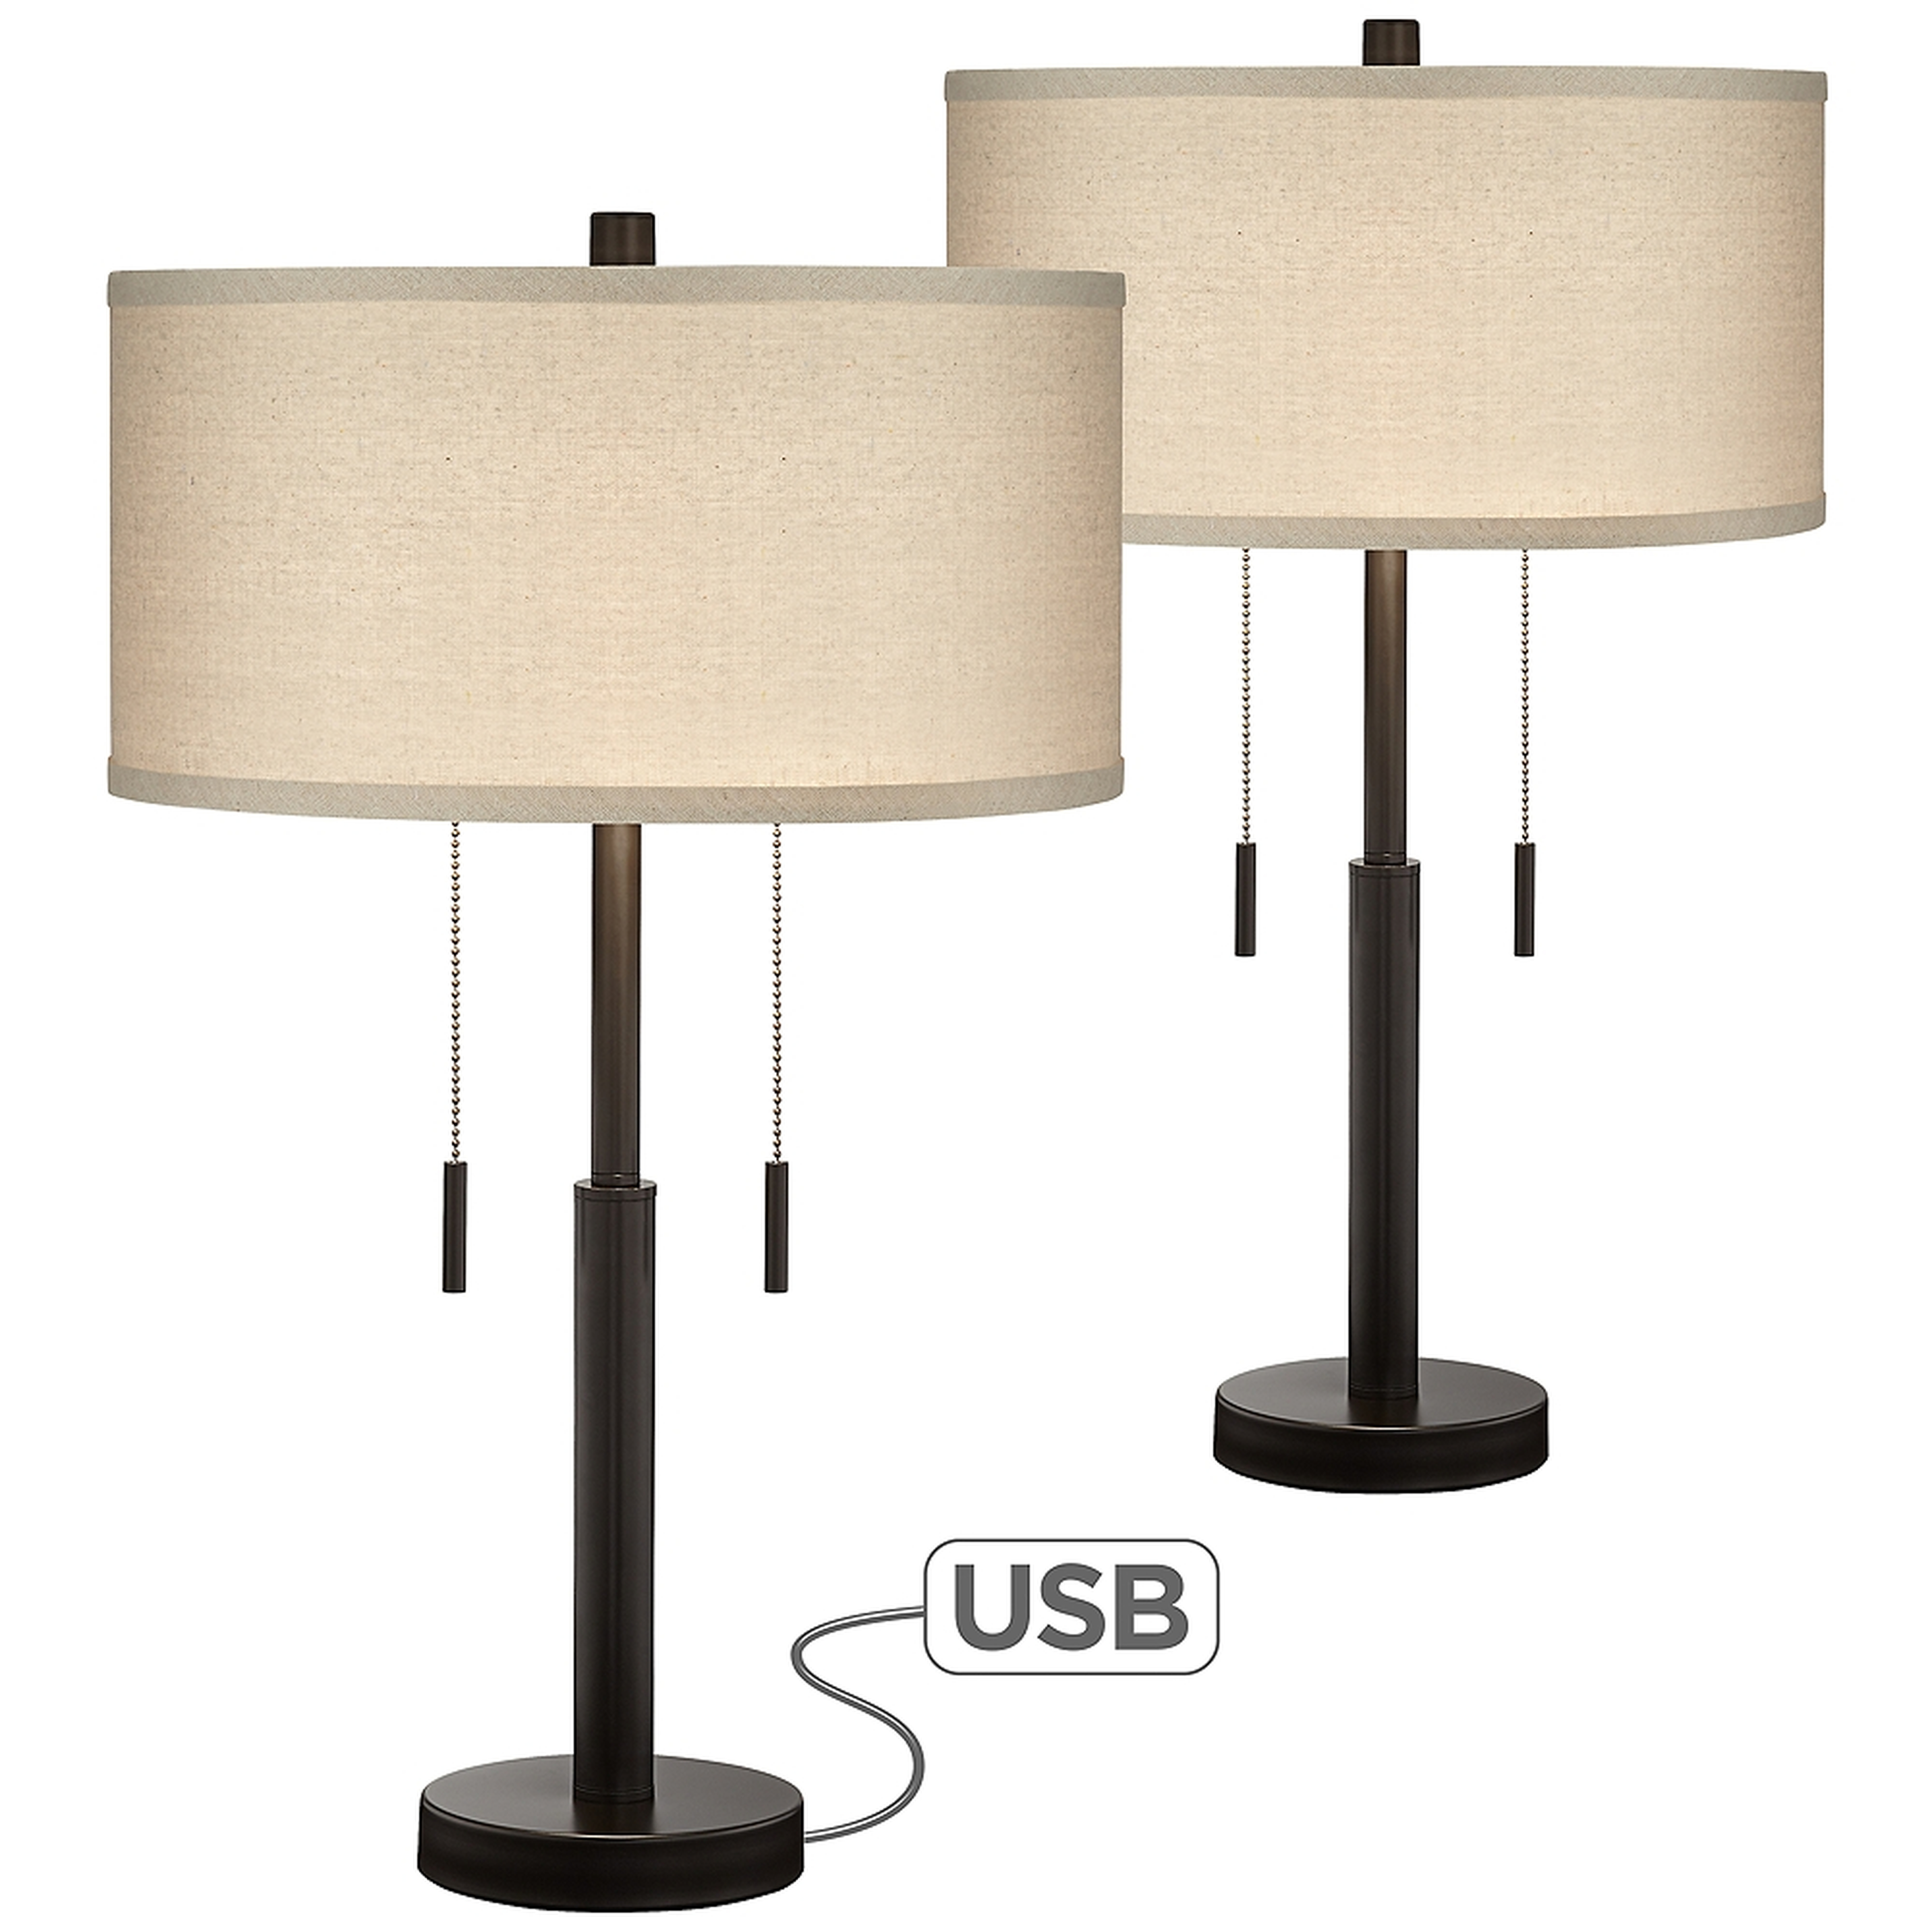 Franklin Iron Works Bernie Industrial Bronze Table Lamps with USB Set of 2 - Lamps Plus